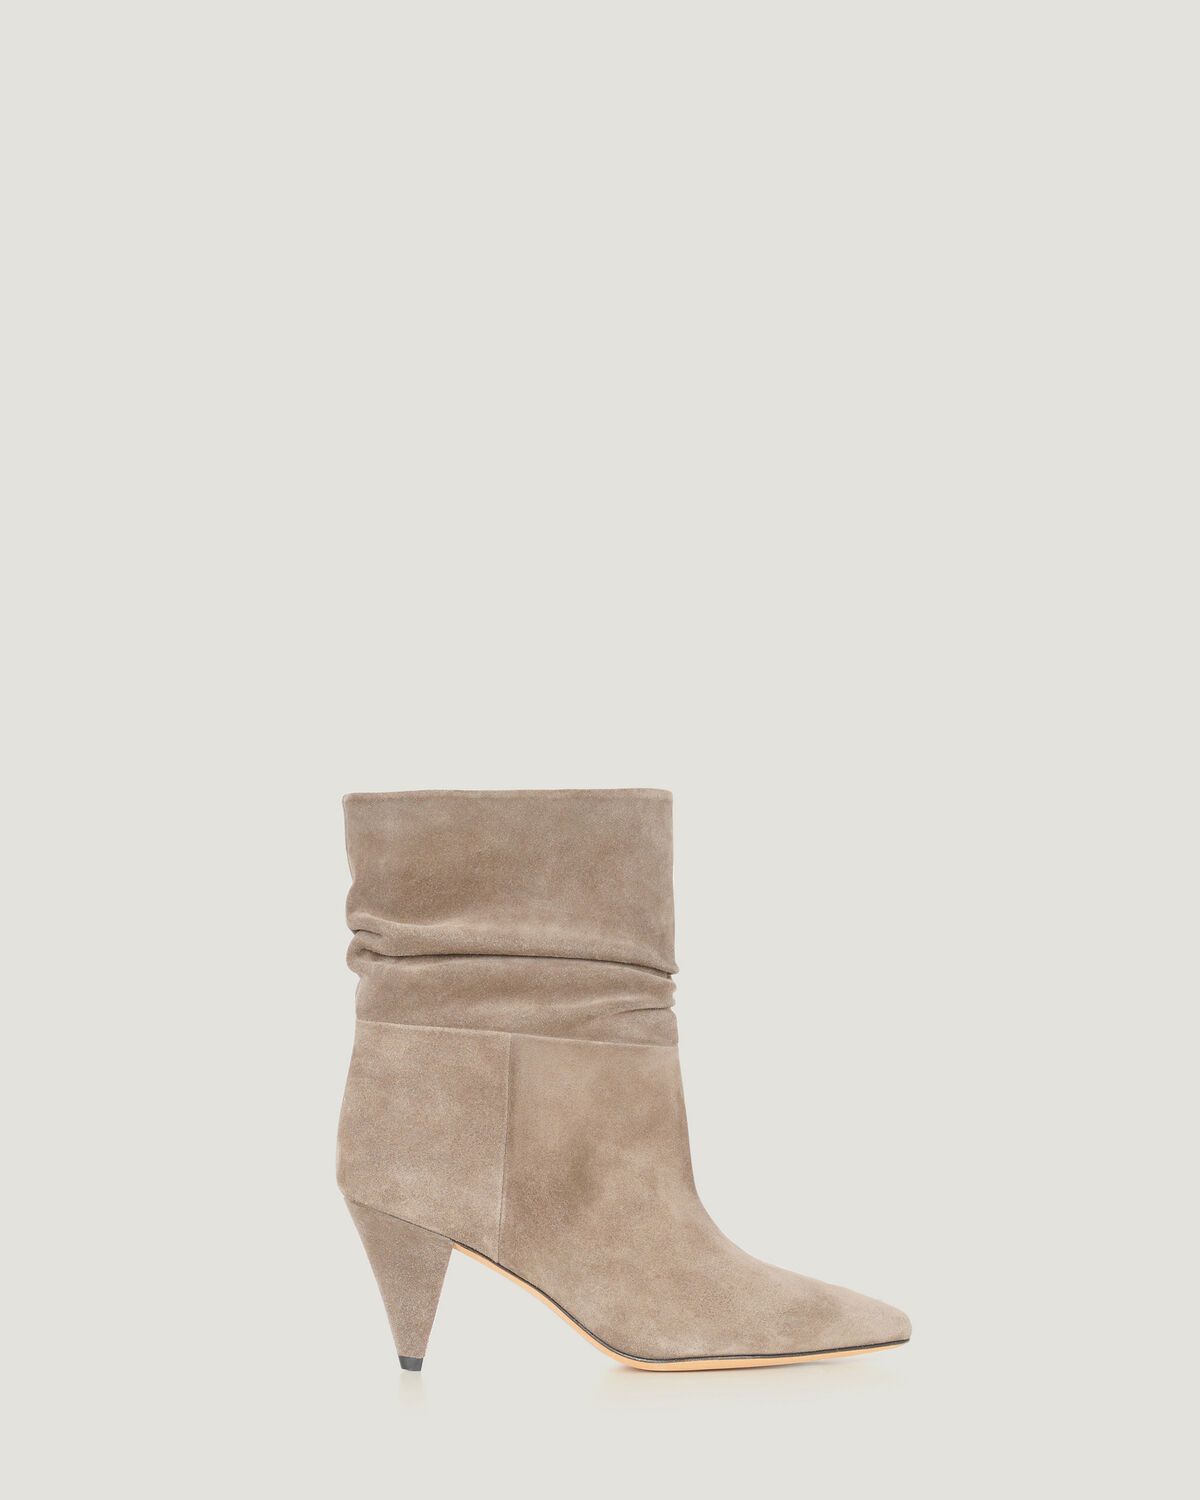 THEKE SUEDE SLOUCH ANKLE BOOTS | IRO